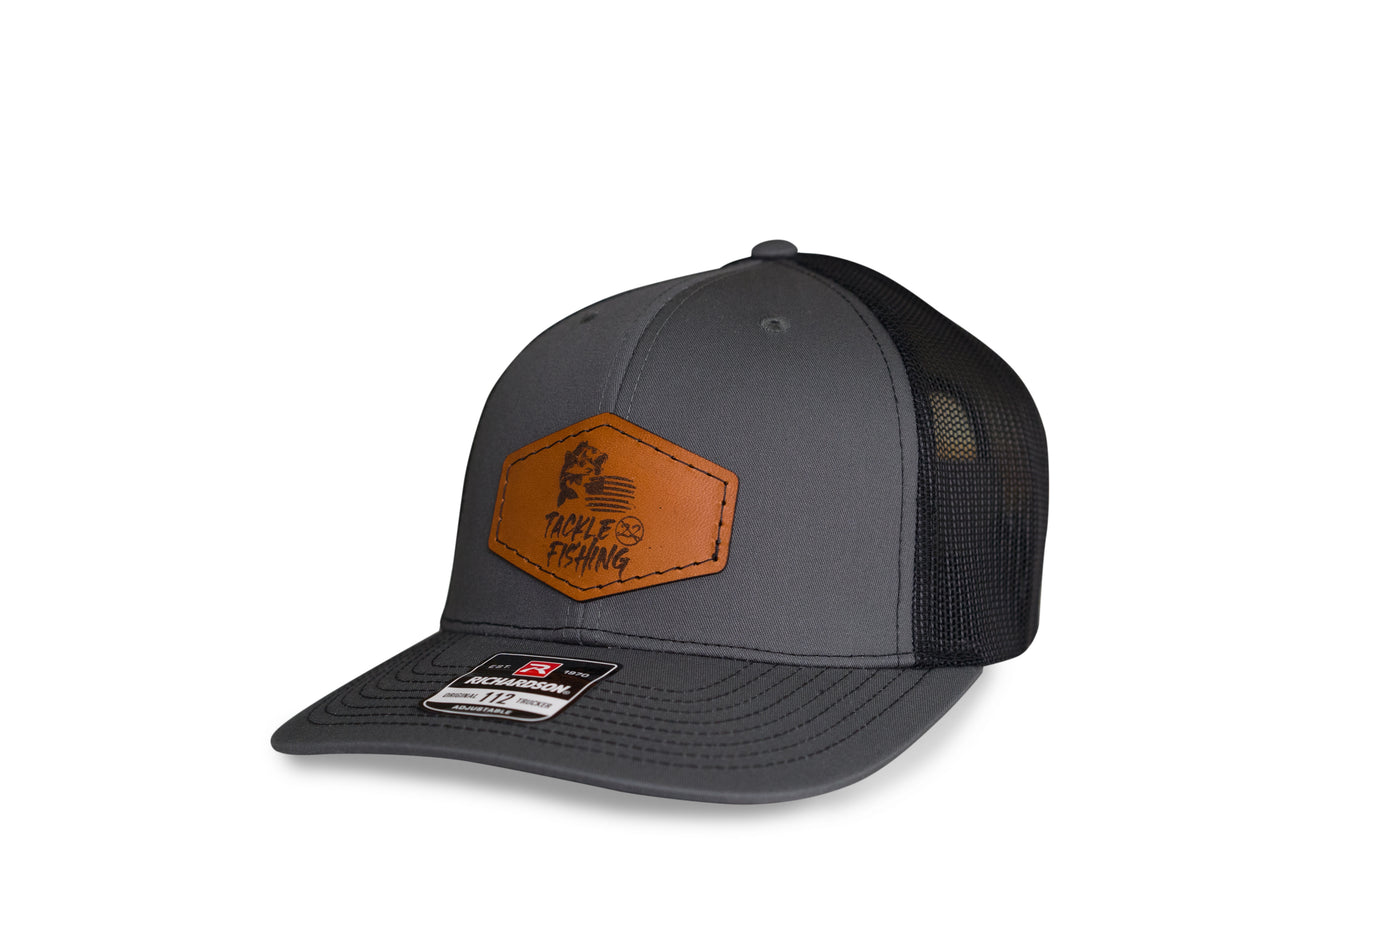 Tackle 22 Grey and Black Leather Patch Hat